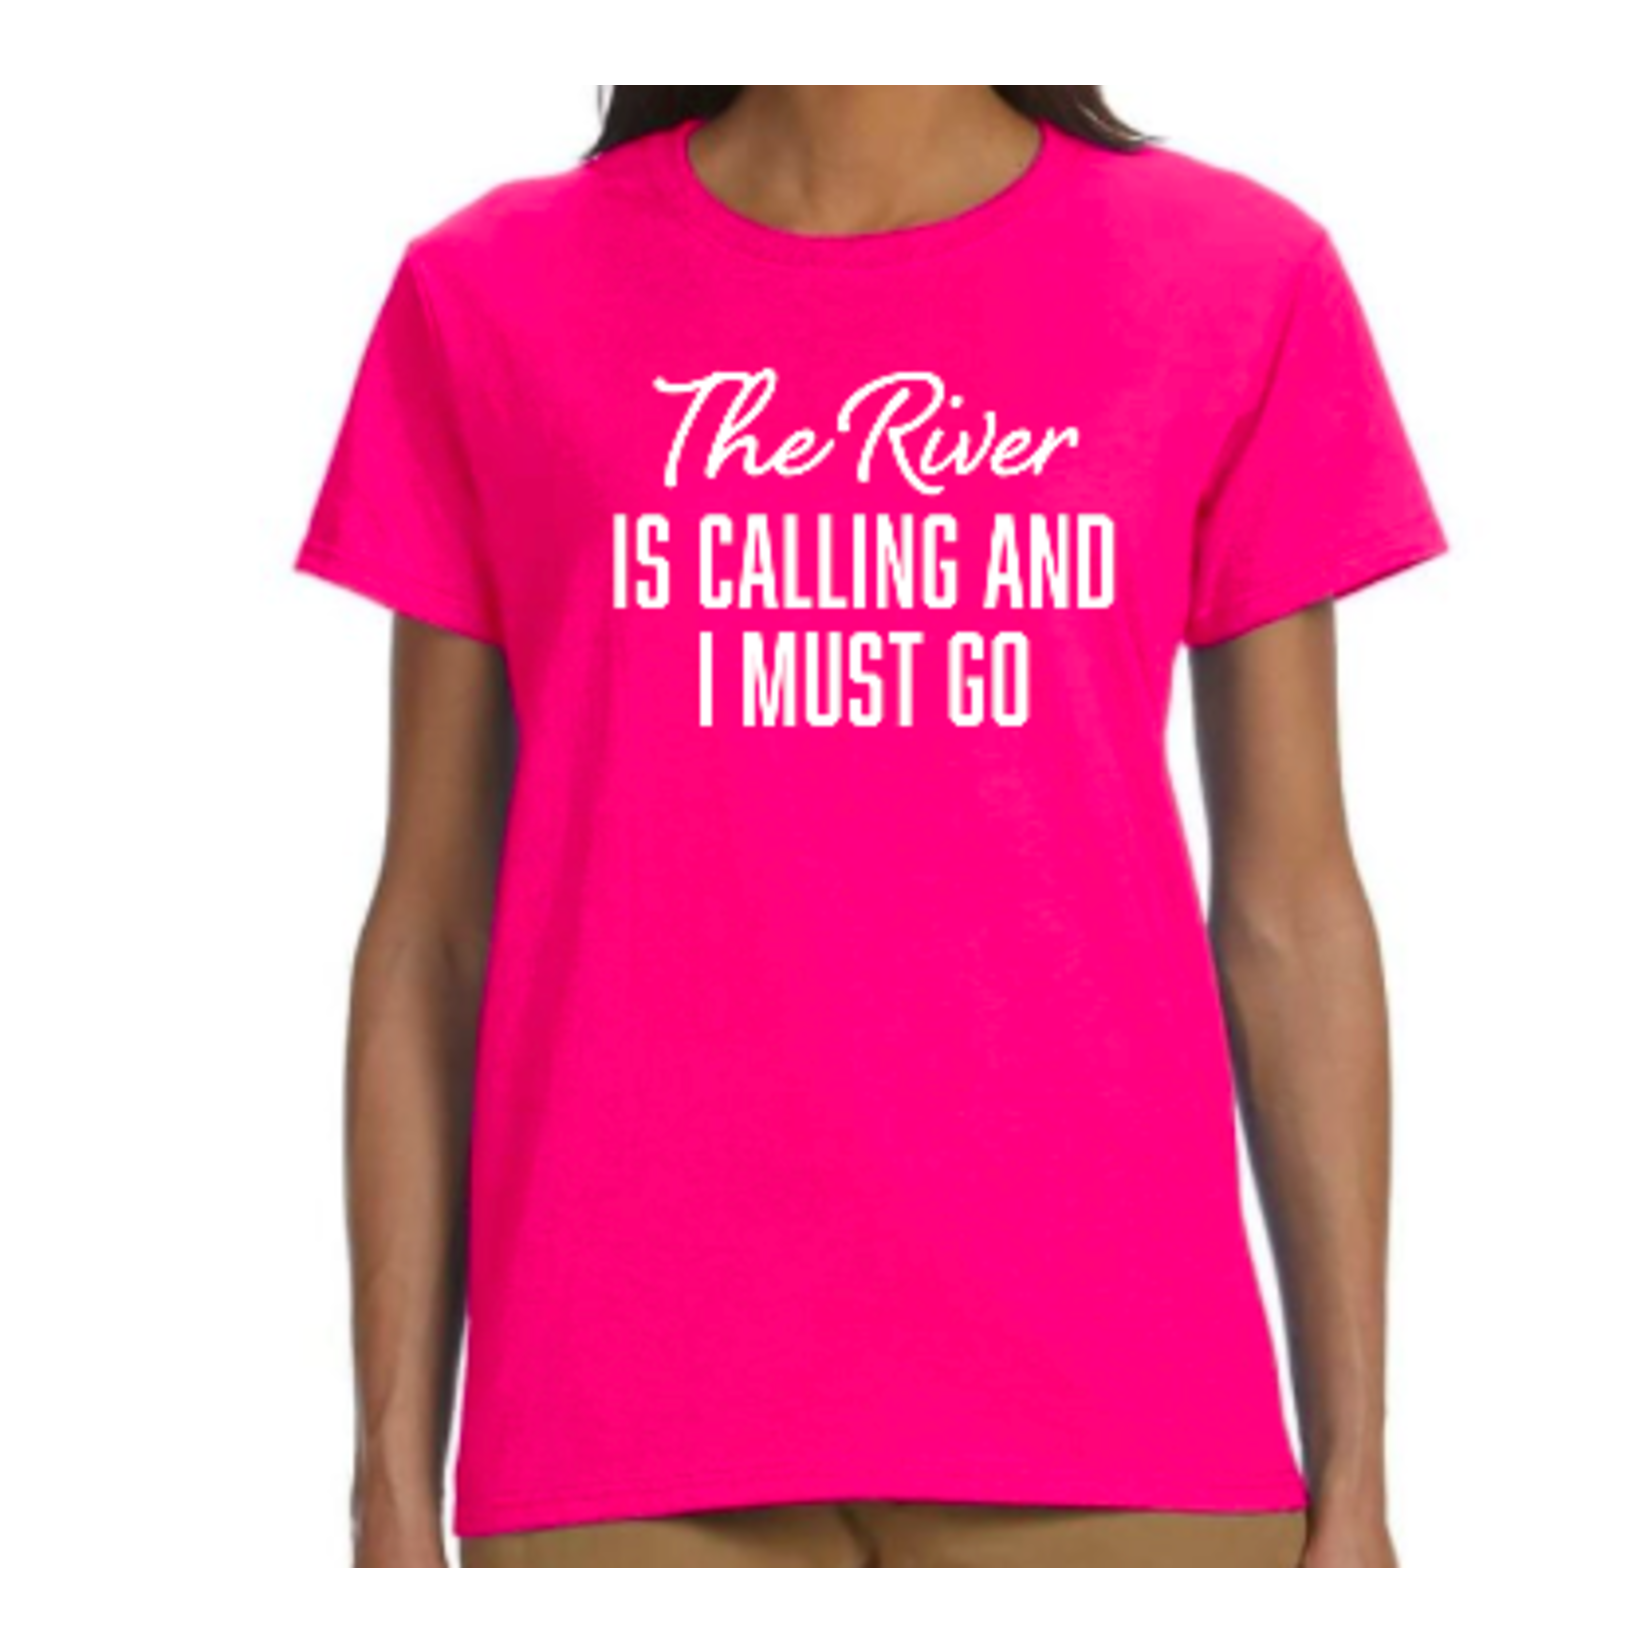 Women's T-shirt: The river is calling me and I must go